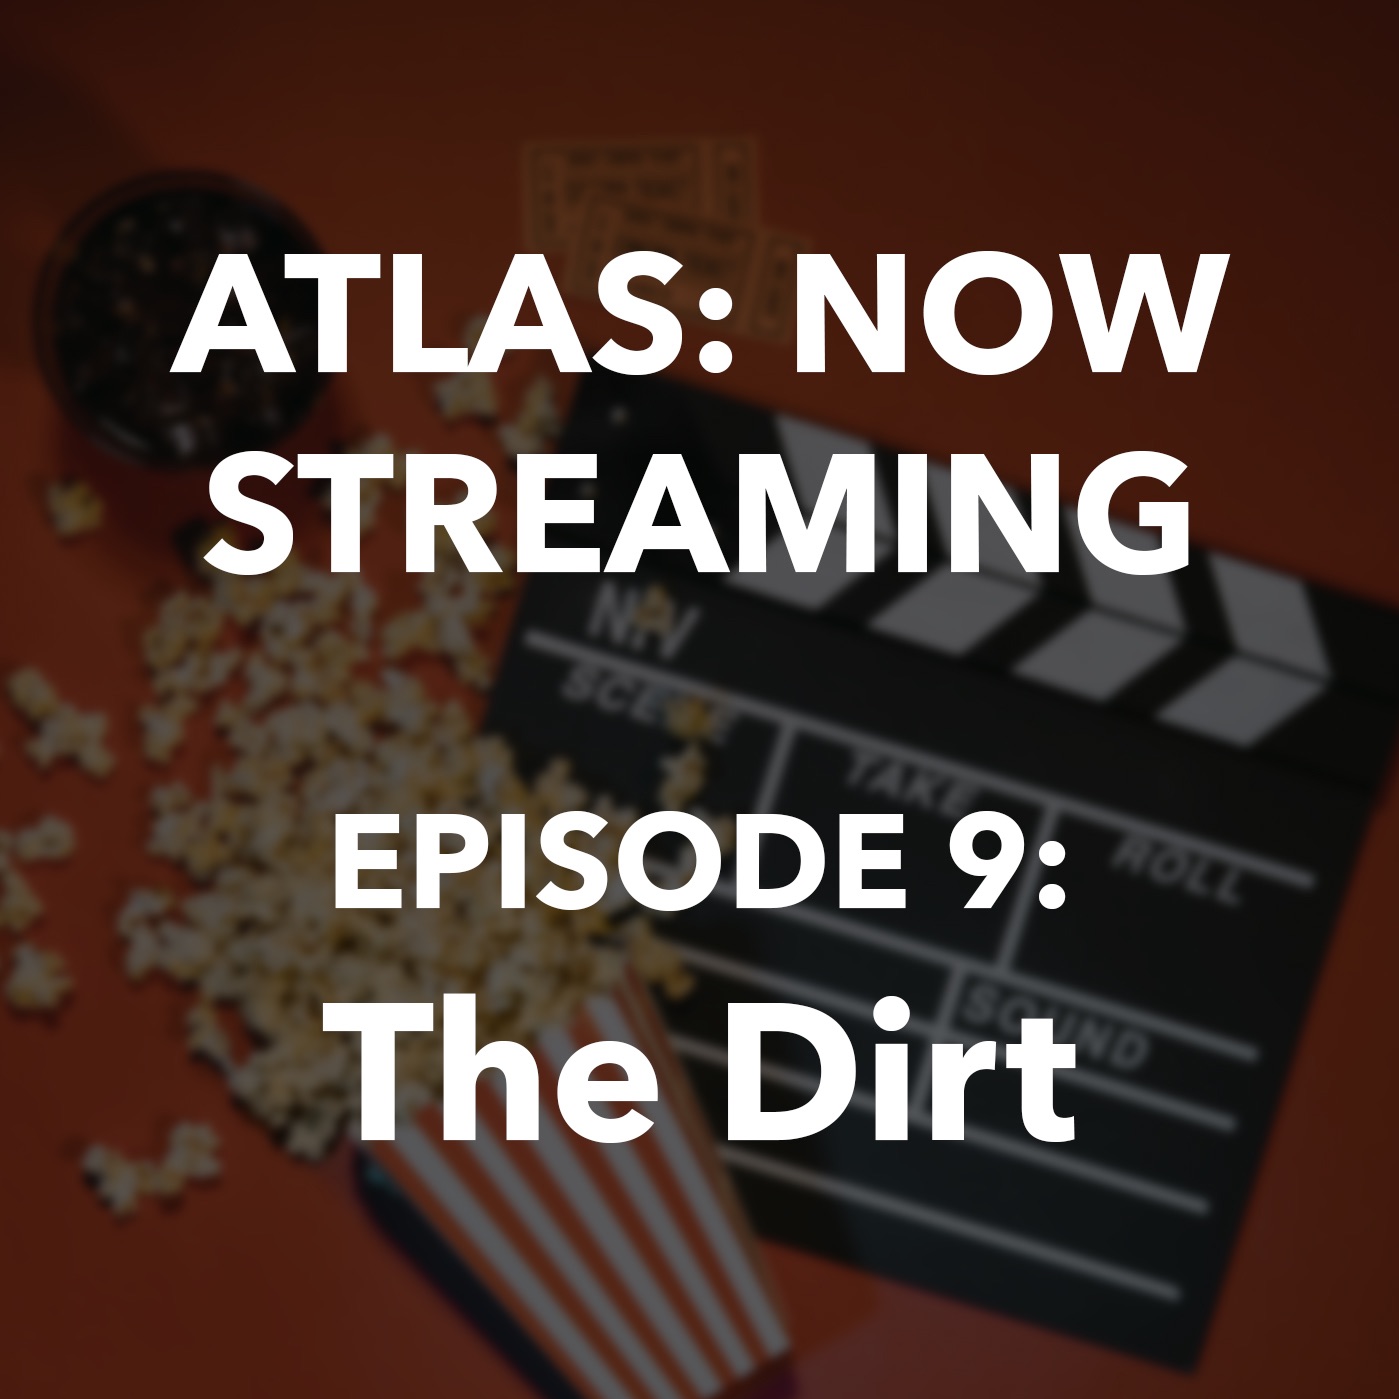 Atlas: Now Streaming Episode 9 - The Dirt